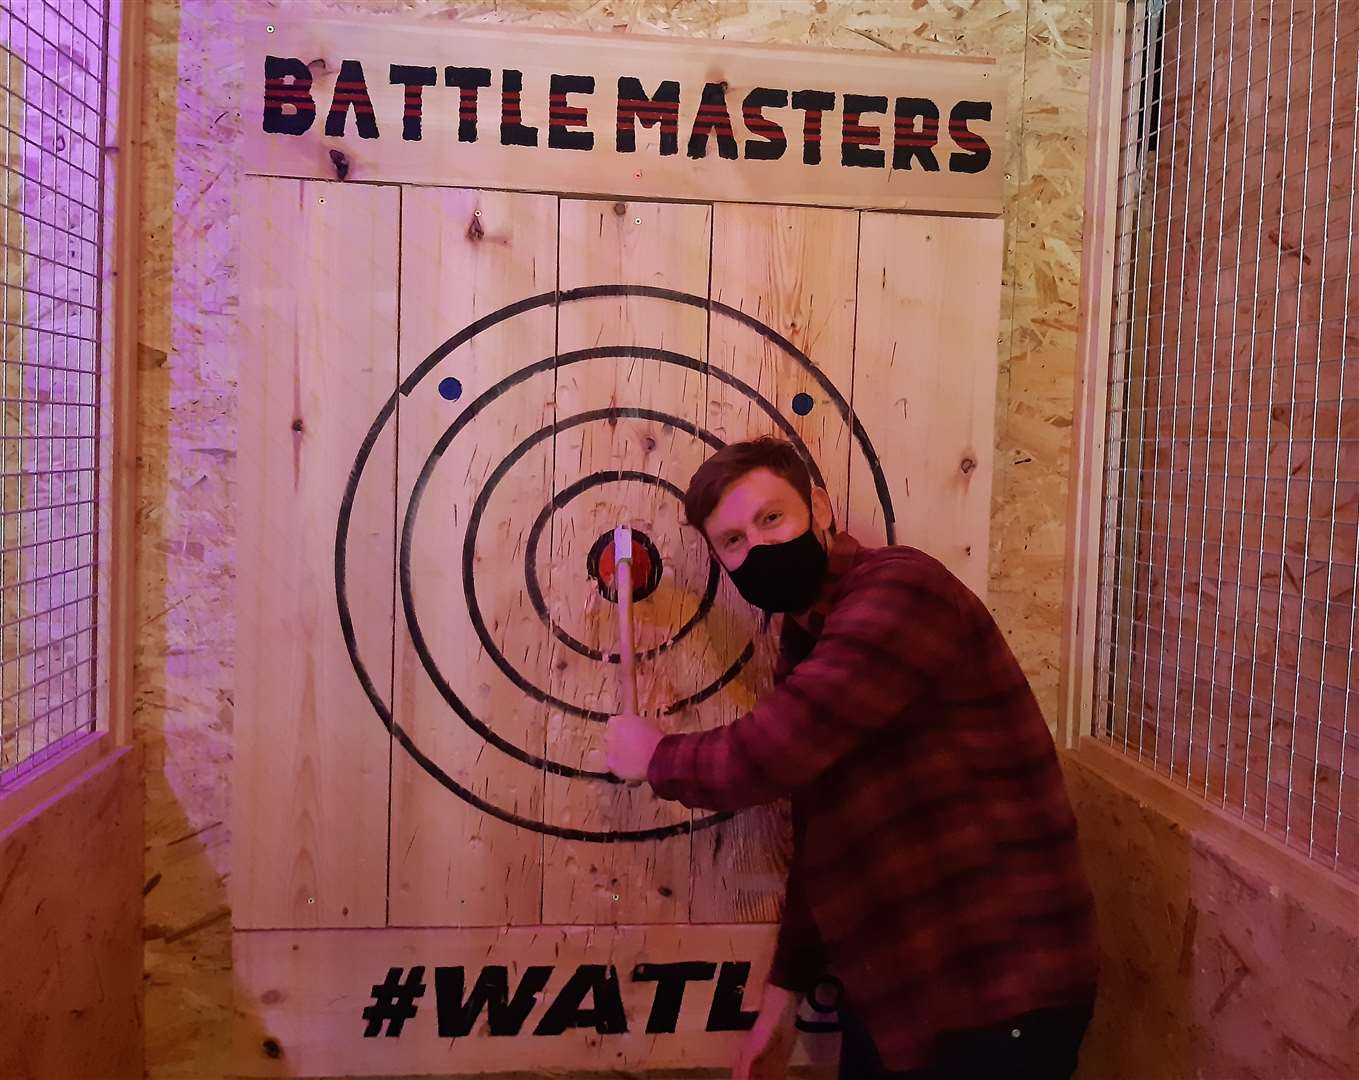 Our reporter Sean Delaney tries his hand at urban axe throwing